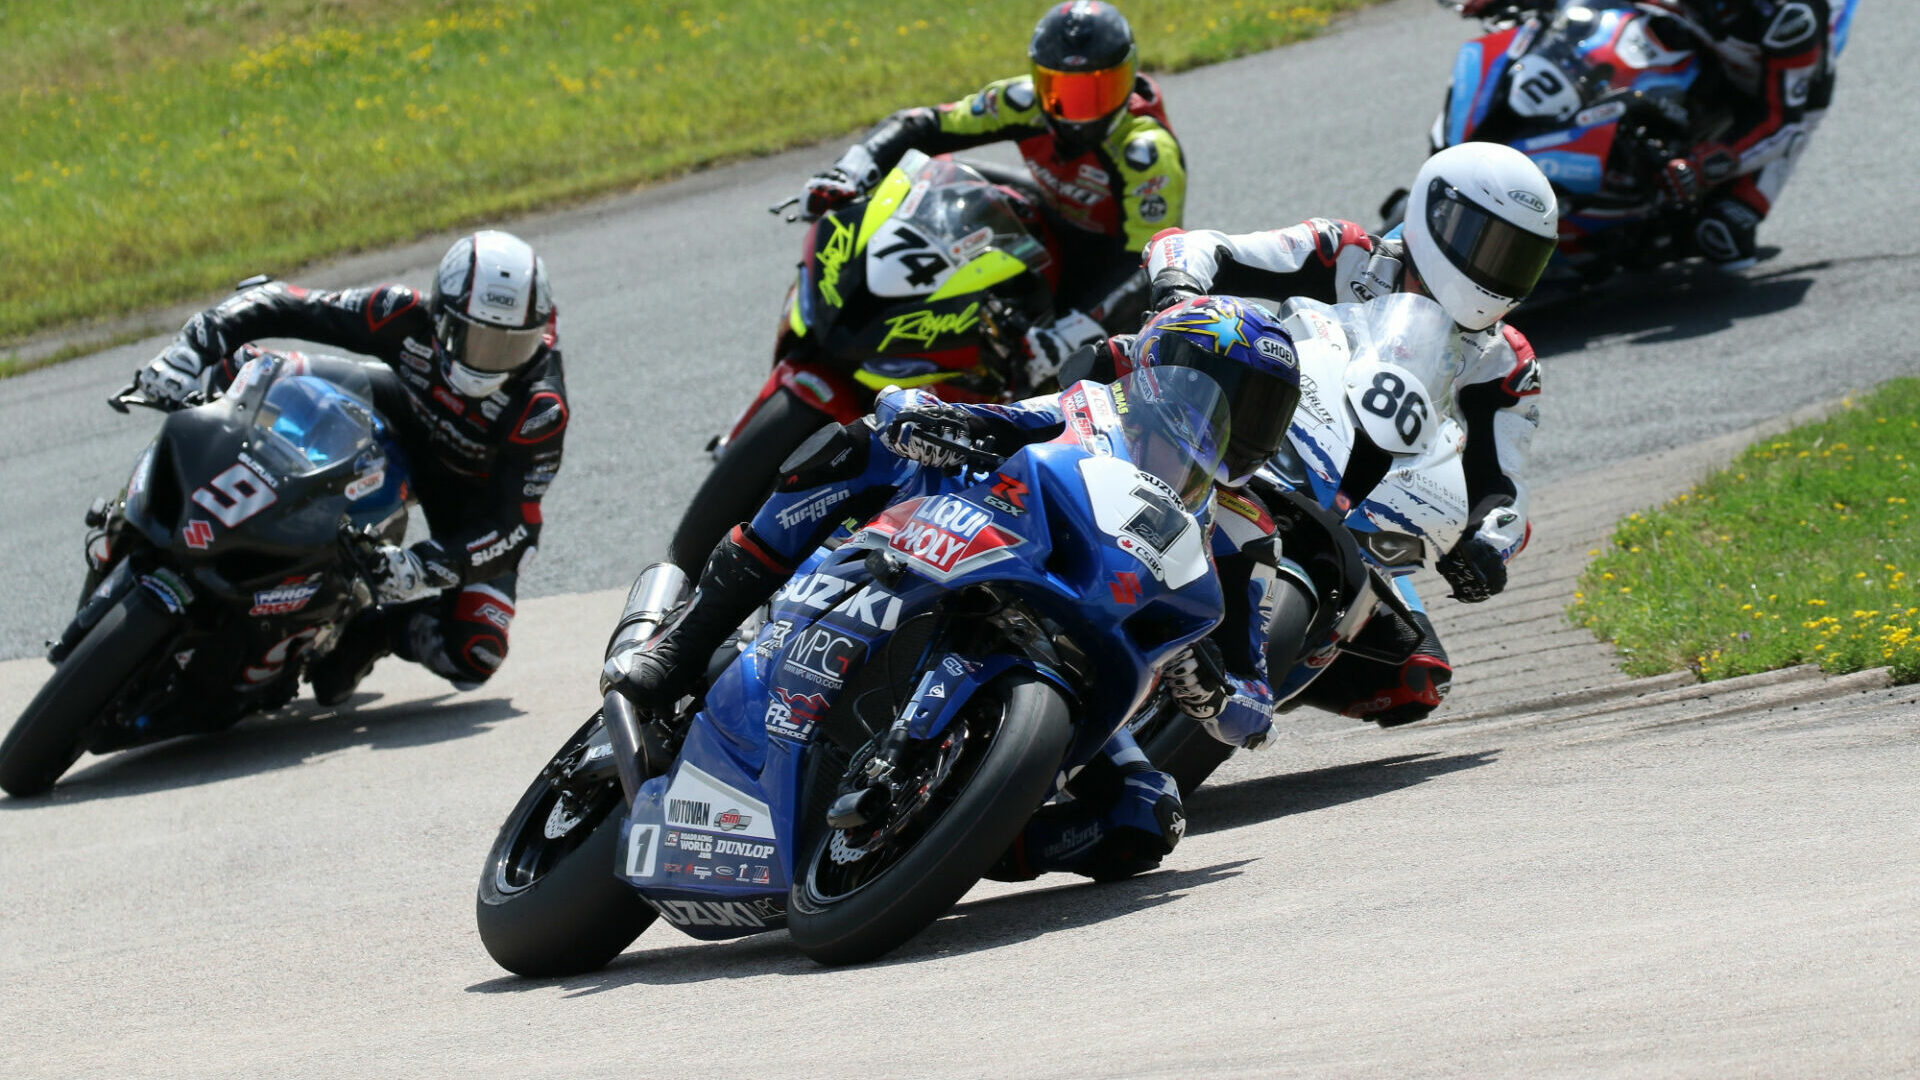 Alex Dumas (1) leads the opening lap of Saturday's Superbike race at Atlantic Motorsport Park. However, Ben Young (86) would go on to claim the victory after Dumas crashed out of the lead at the halfway point. Trevor Daley (9) finished second ahead of Michael Leon (74). Sam Guerin (2) was fourth. Photo by Rob O'Brien, courtesy CSBK/PMP.